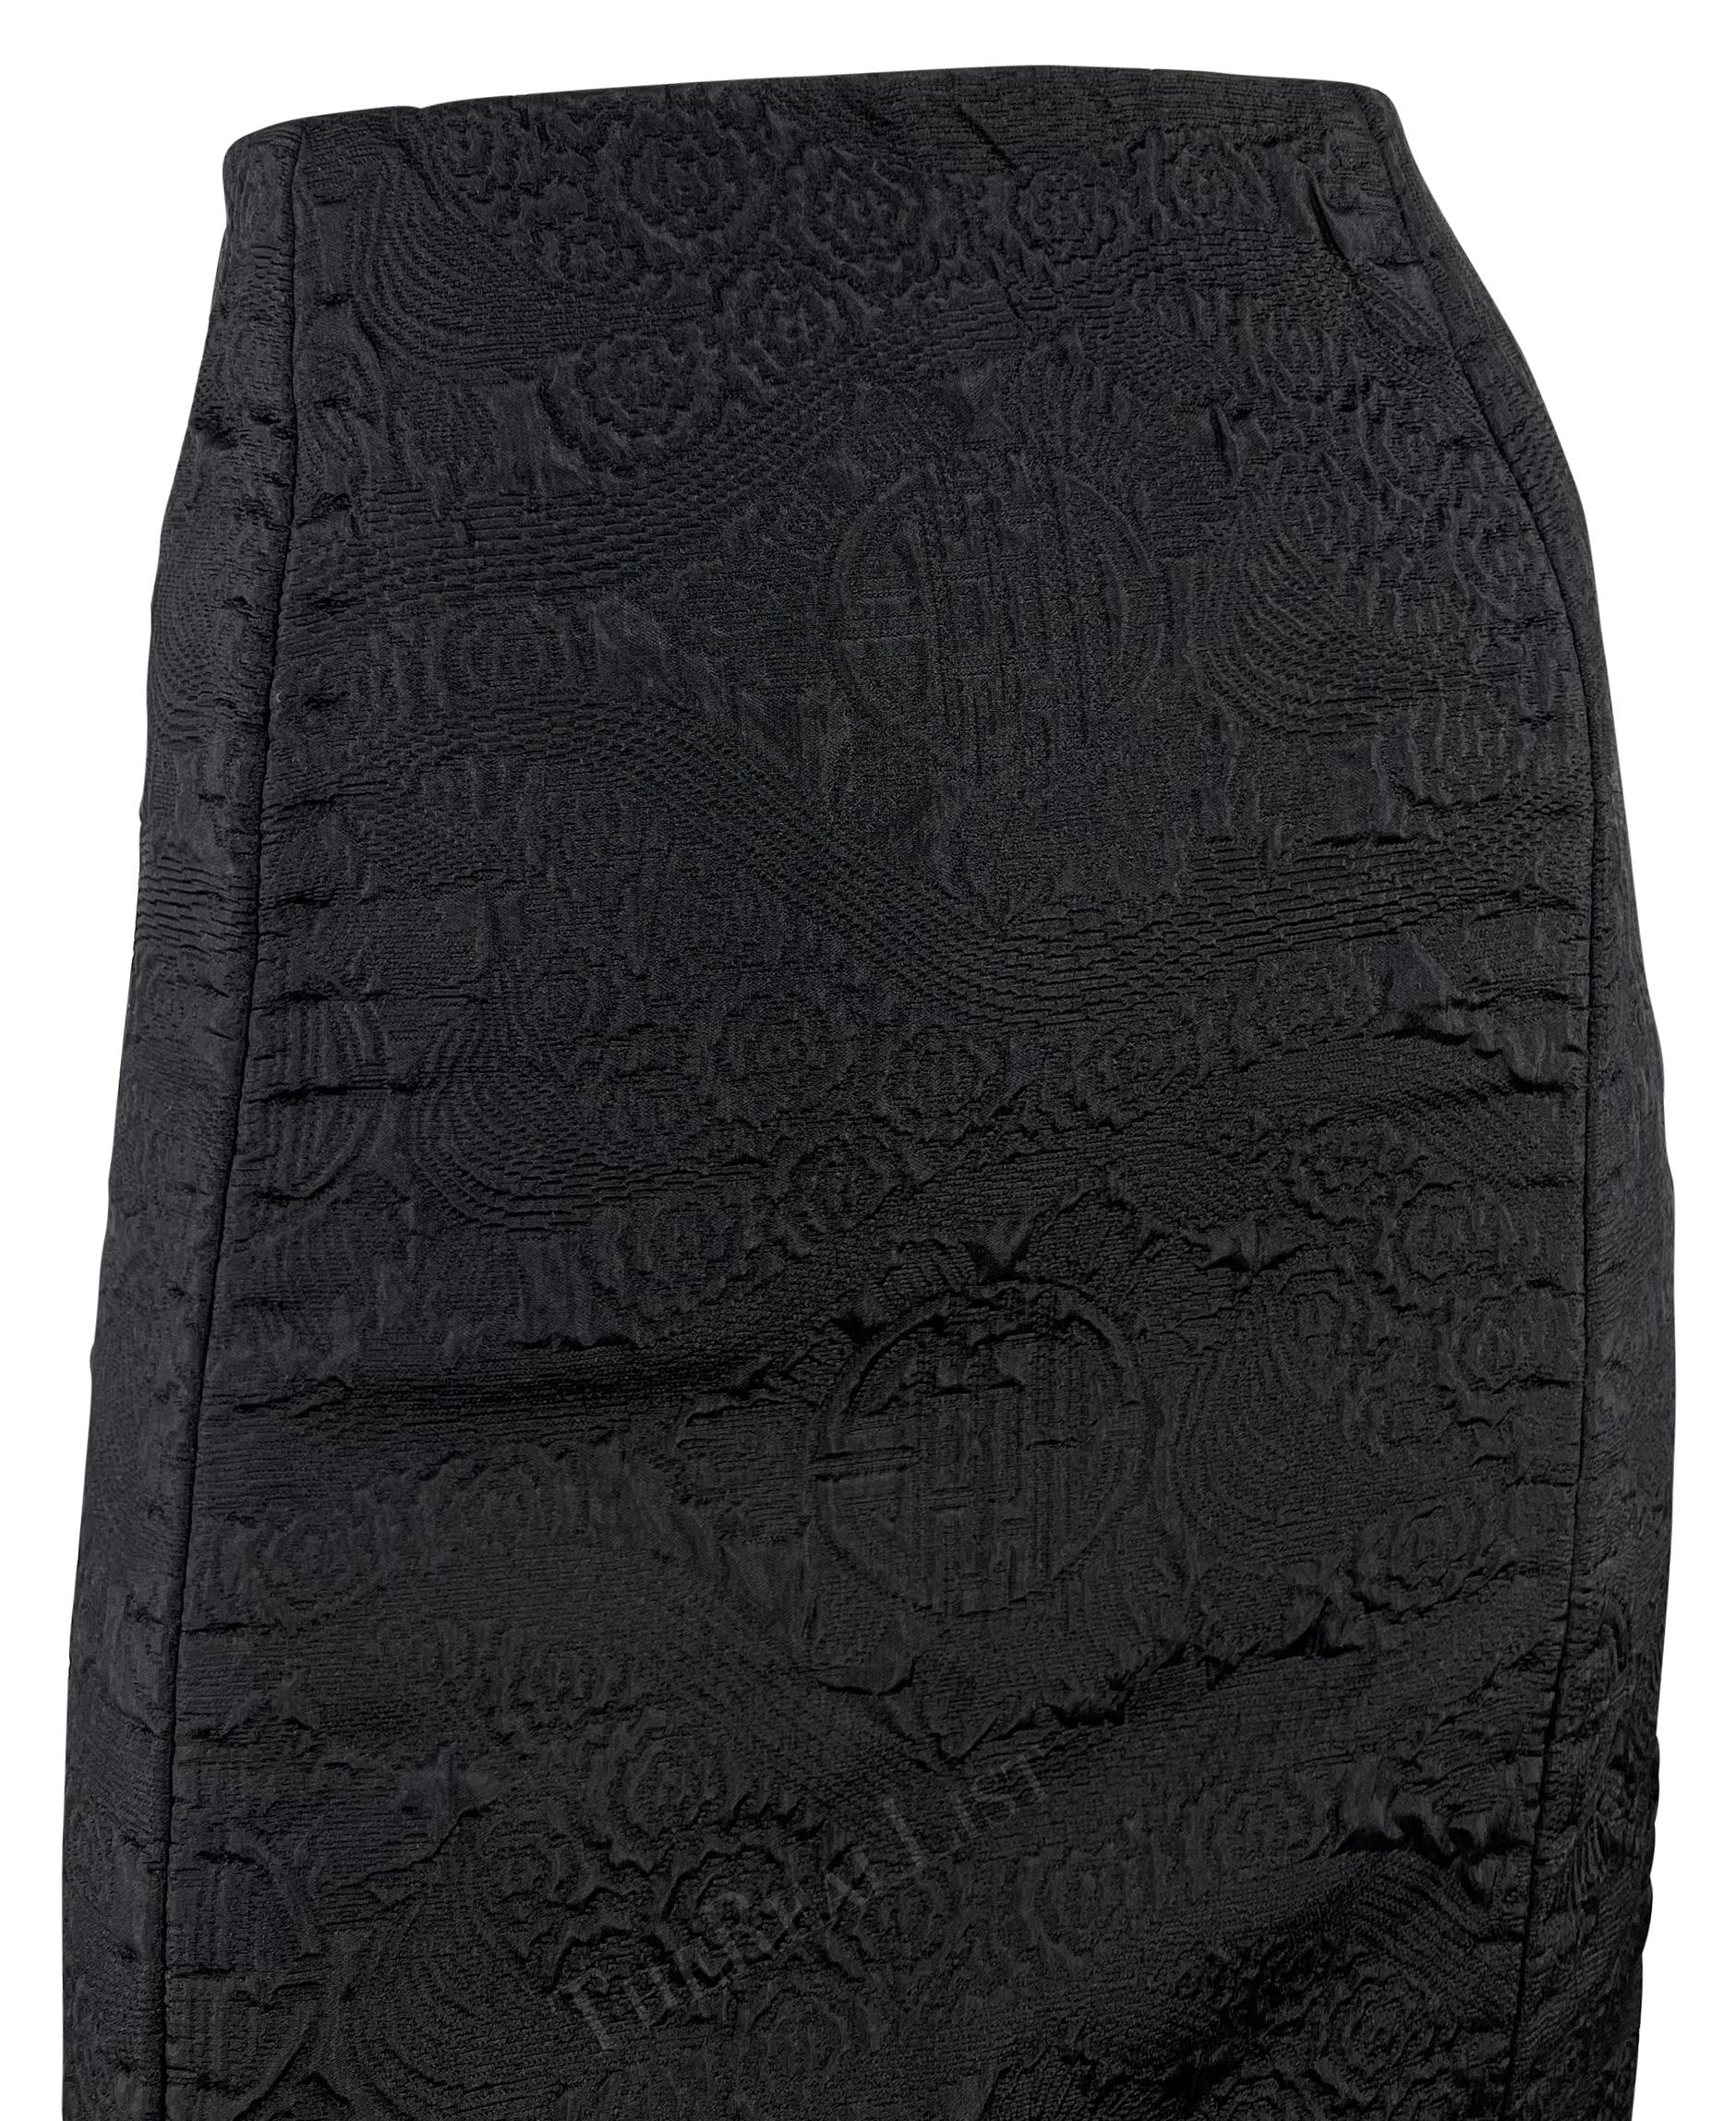 This sophisticated black chinoiserie textured pencil skirt by Yves Saint Laurent, was designed by Tom Ford for the Fall/Winter 2004 collection, marking Ford’s final season at YSL. This high-waisted skirt showcases a woven chinoiserie pattern and